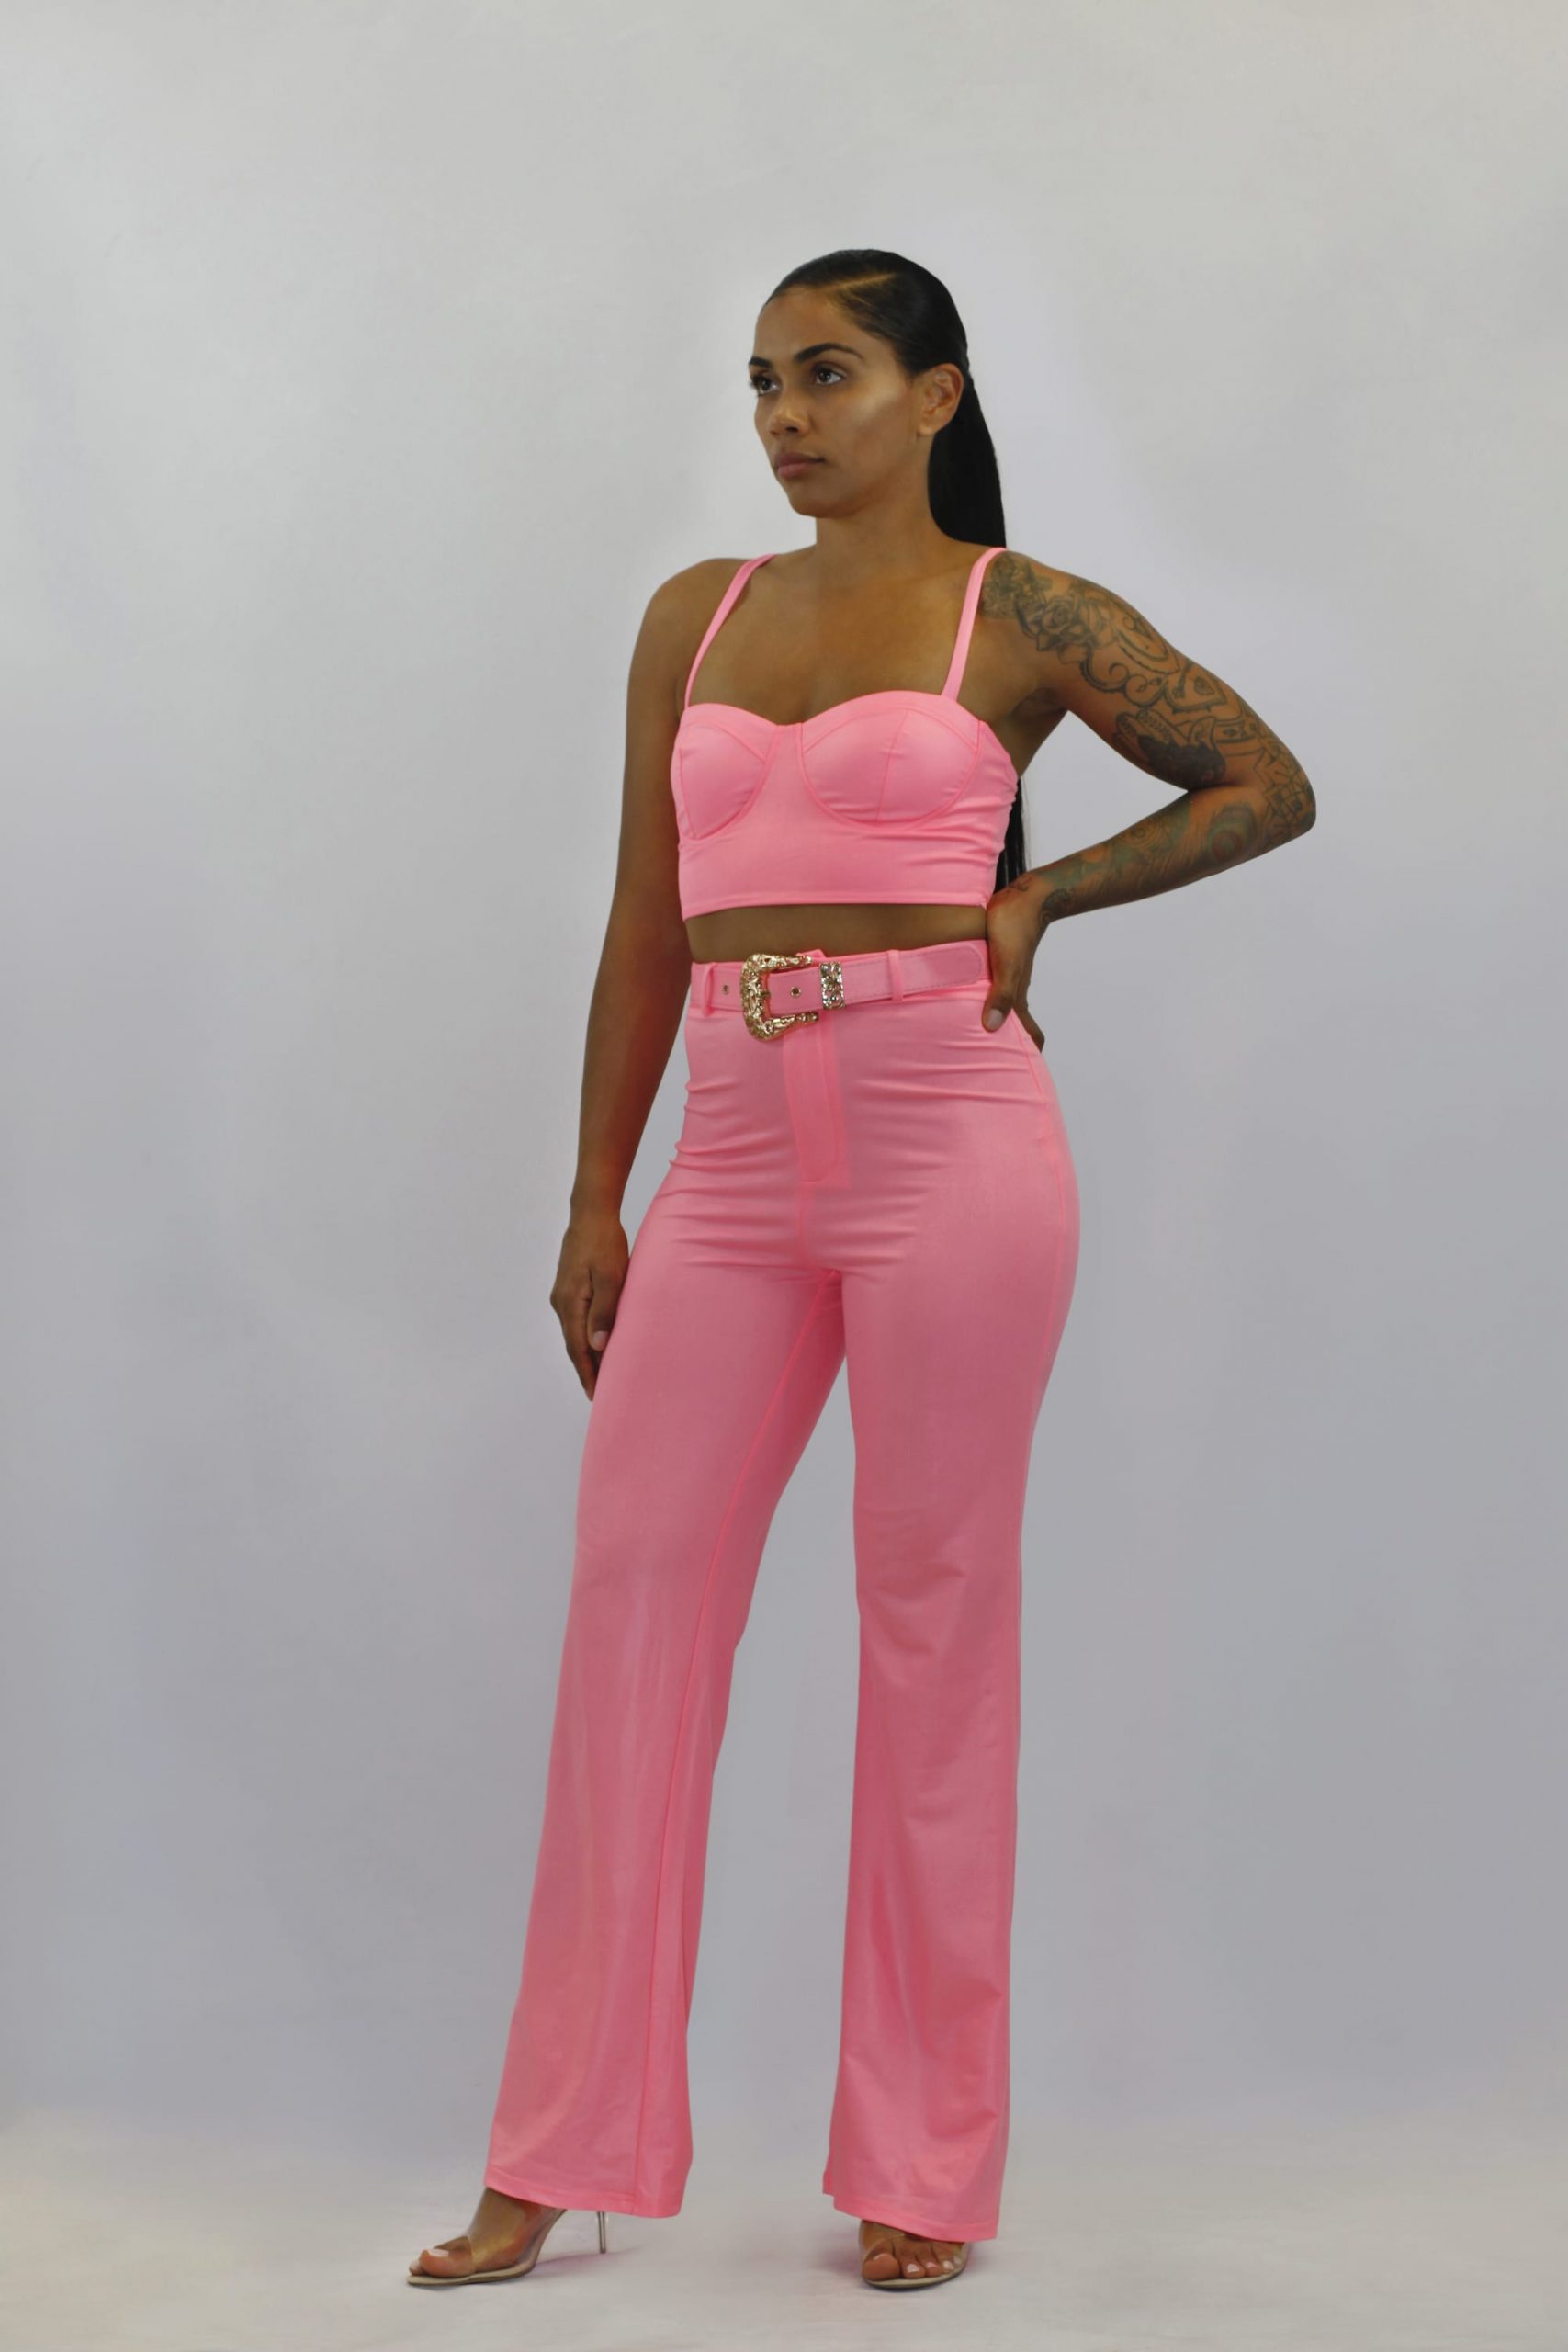 Feast Chinese cabbage brake Hot Pink Party 2 Piece Pants Set - Love Chic StyleLove Chic Style